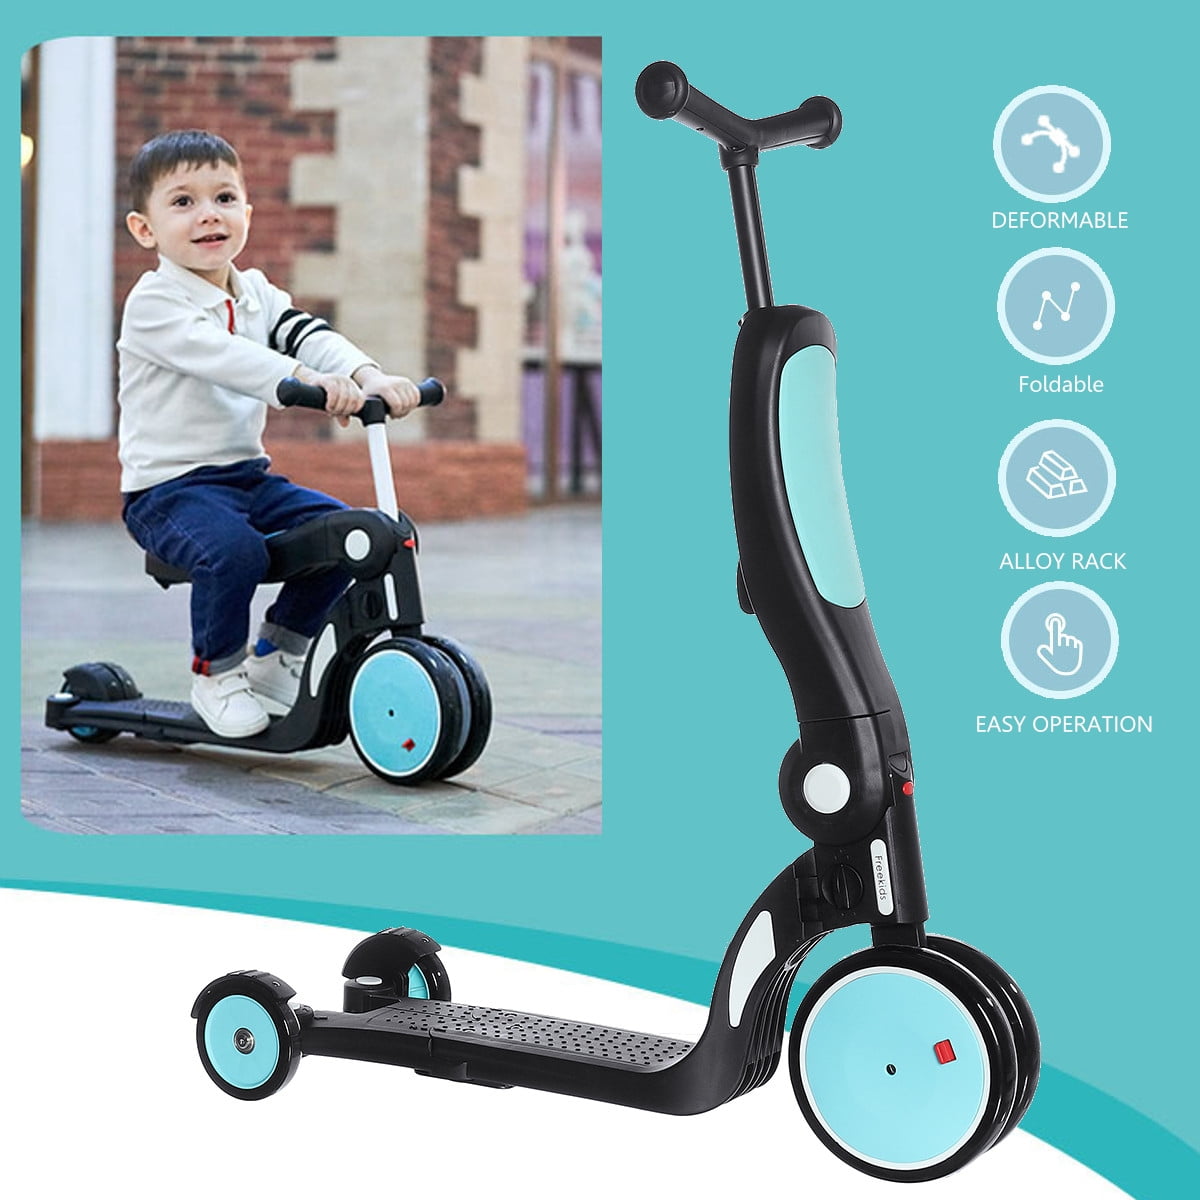 Toddler Scooter with Flexible Rear Wheel 1-6 Years Old Blue/Red Portable 3-Wheeled Scooter for Kids with Detachable Pedals Cozy Castle 5-in-1 Kids Scooter with Adjustable Heights 